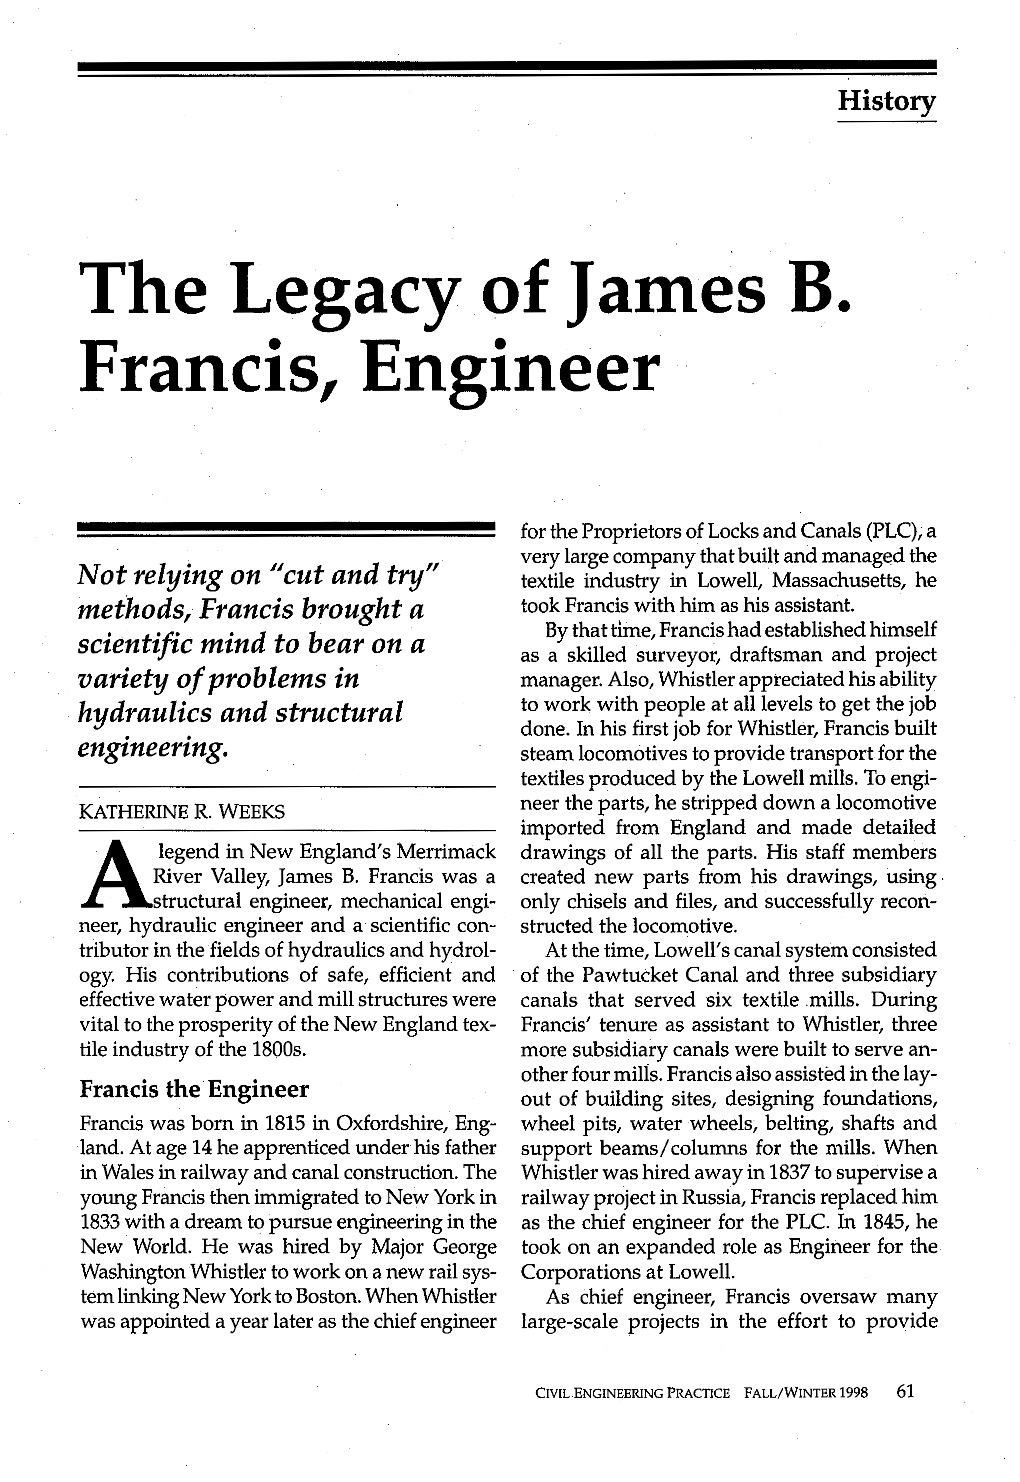 The Legacy of James B. Francis, Engineer​